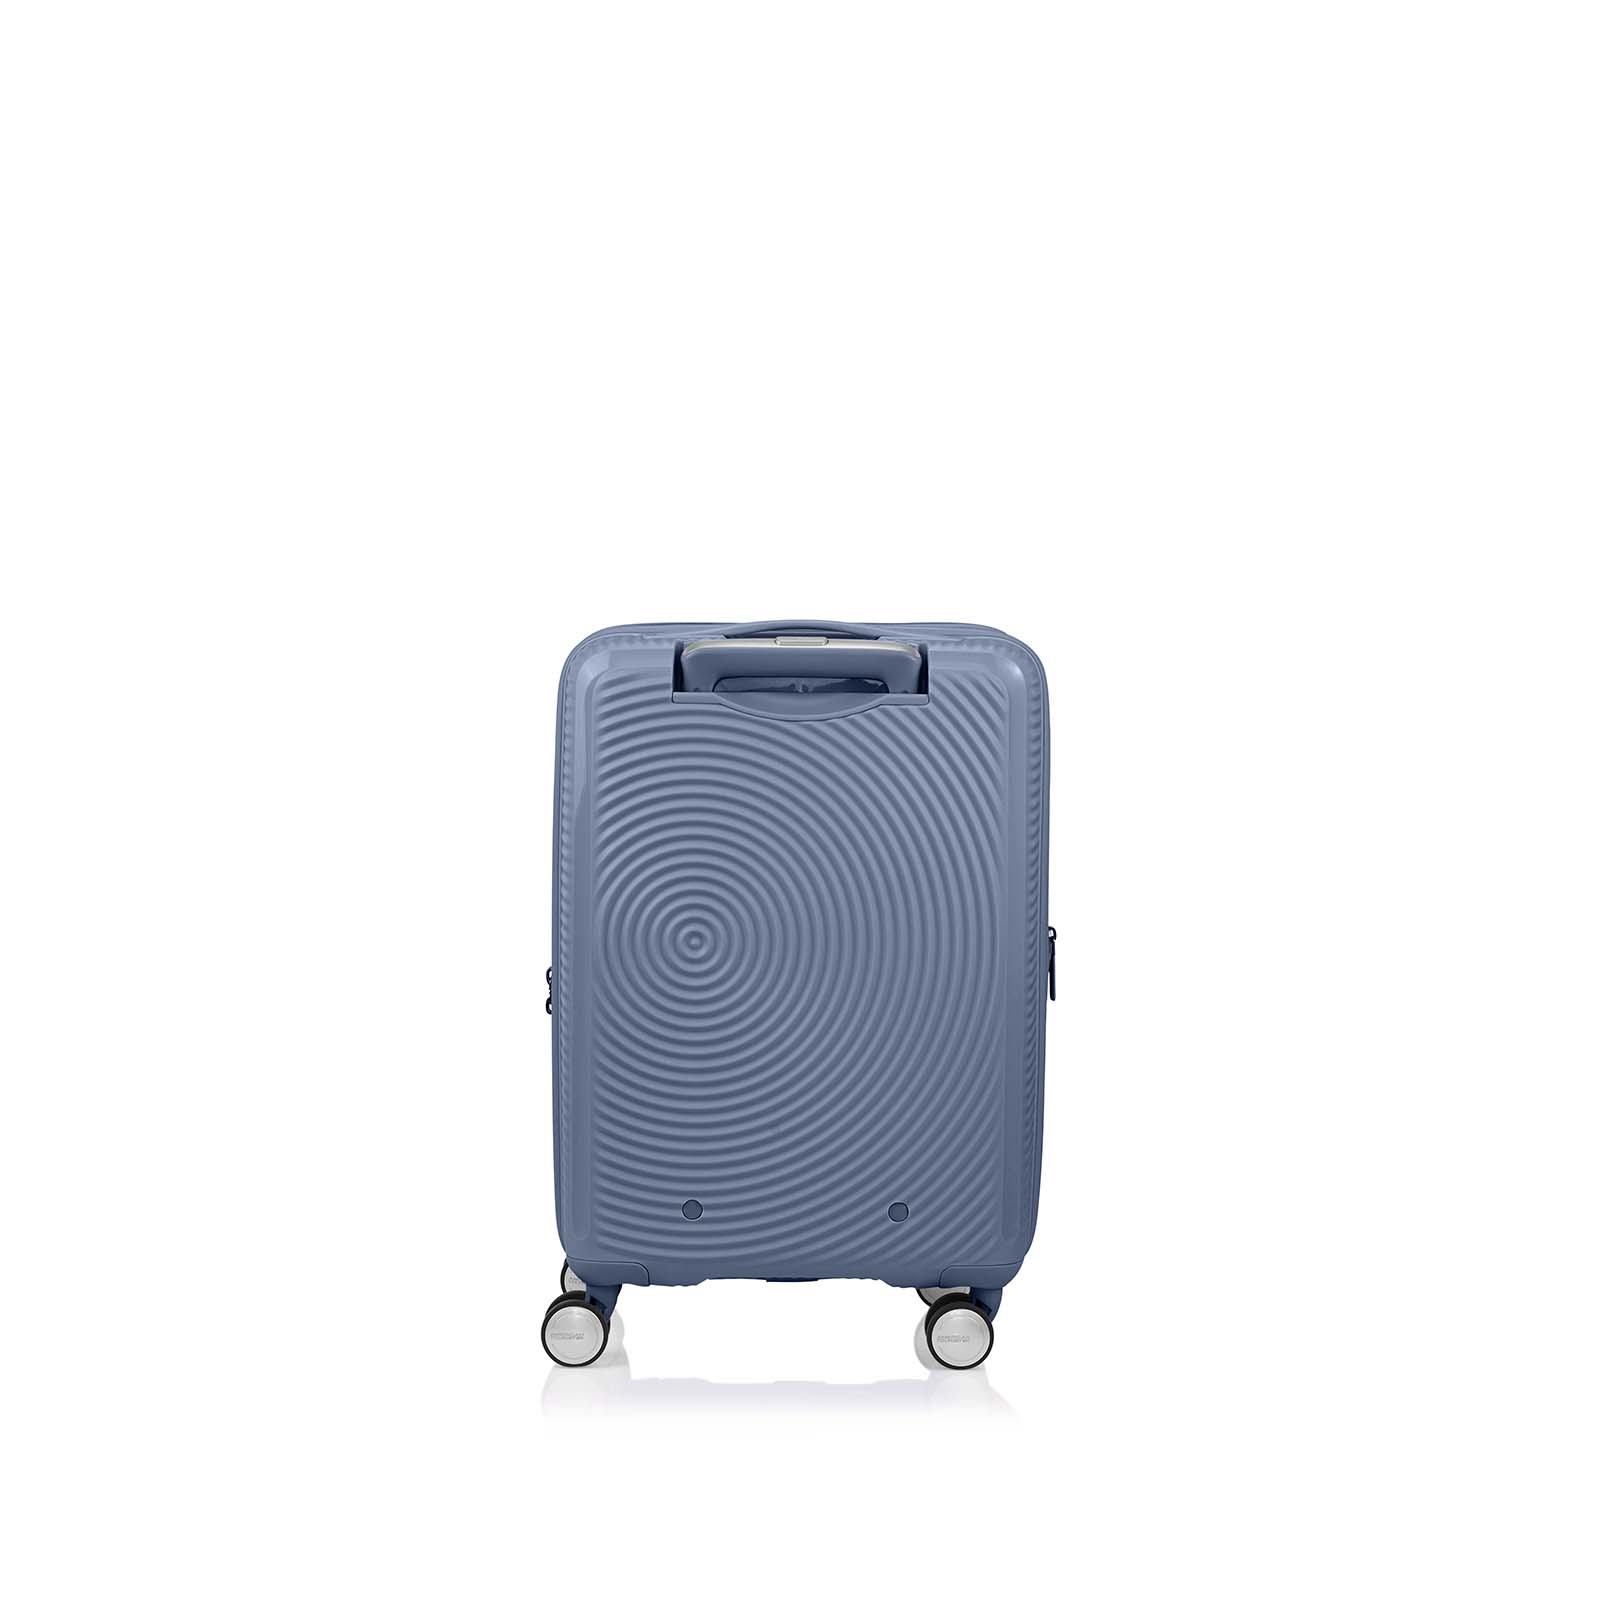 American-Tourister-Curio-2-55cm-Carry-On-Suitcase-Stone-Blue-Back